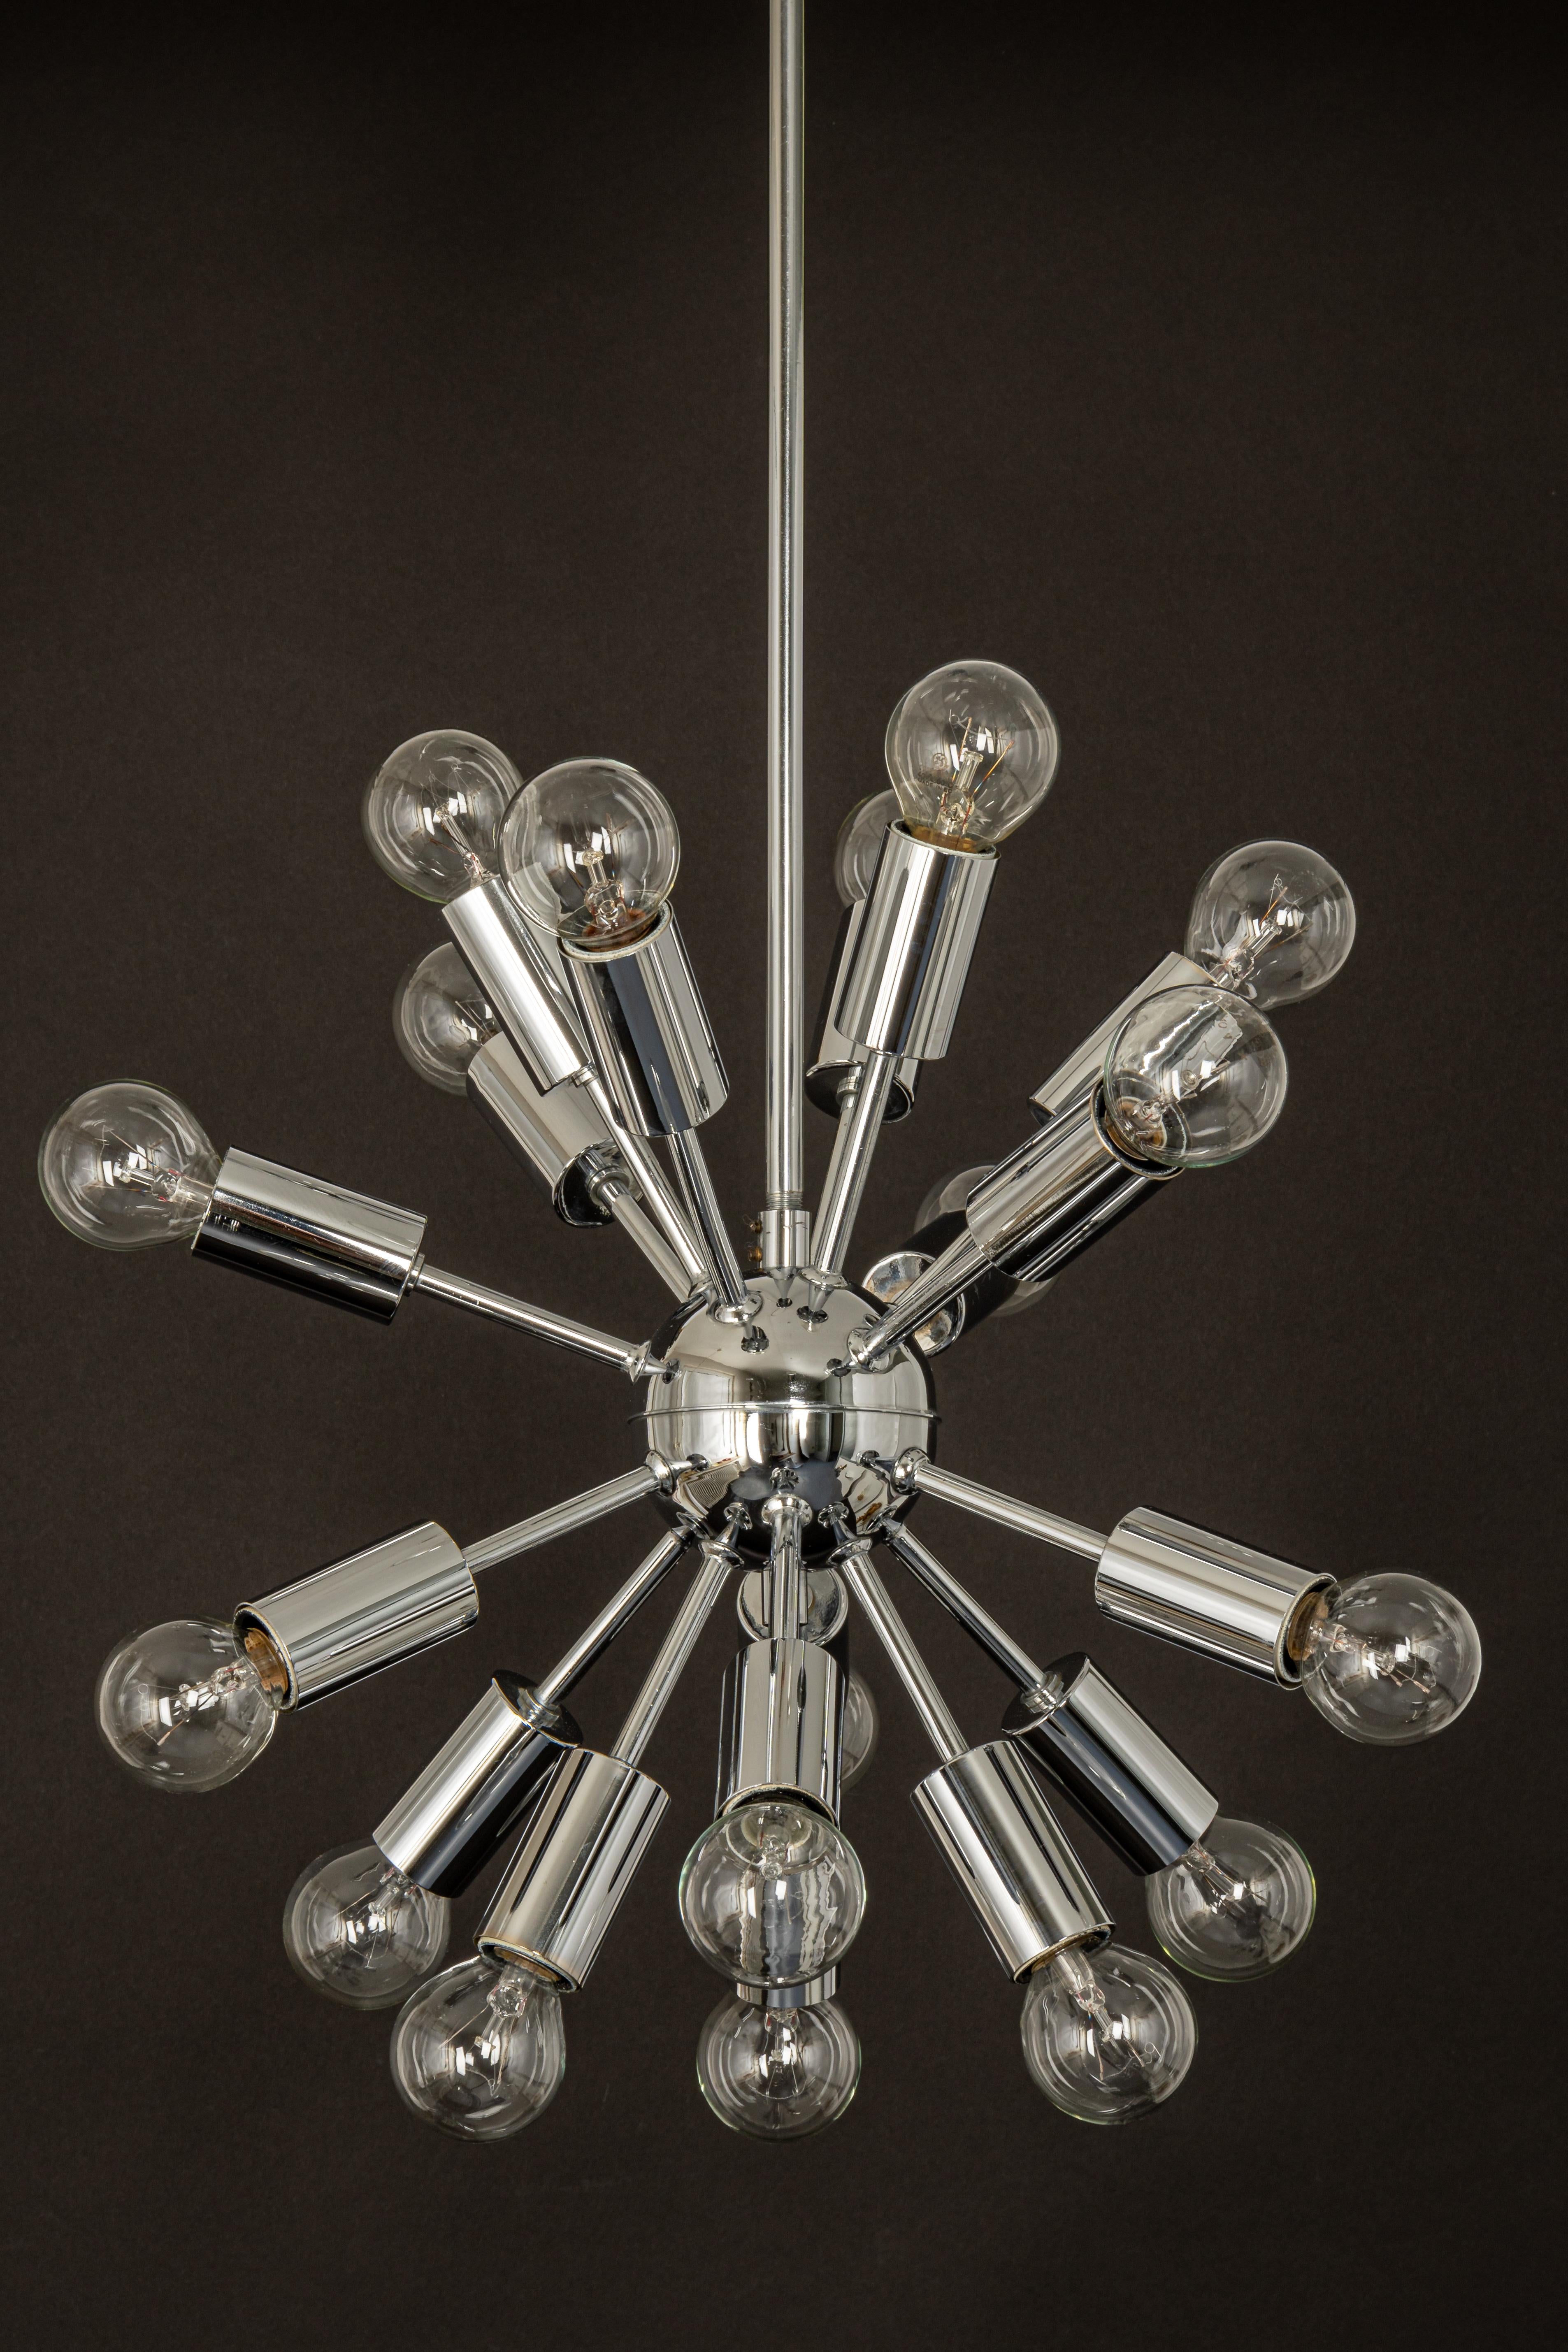 Mid-Century Modern Petite Chrome Space Age Sputnik Atomium Pendant by Cosack, Germany, 1970s For Sale